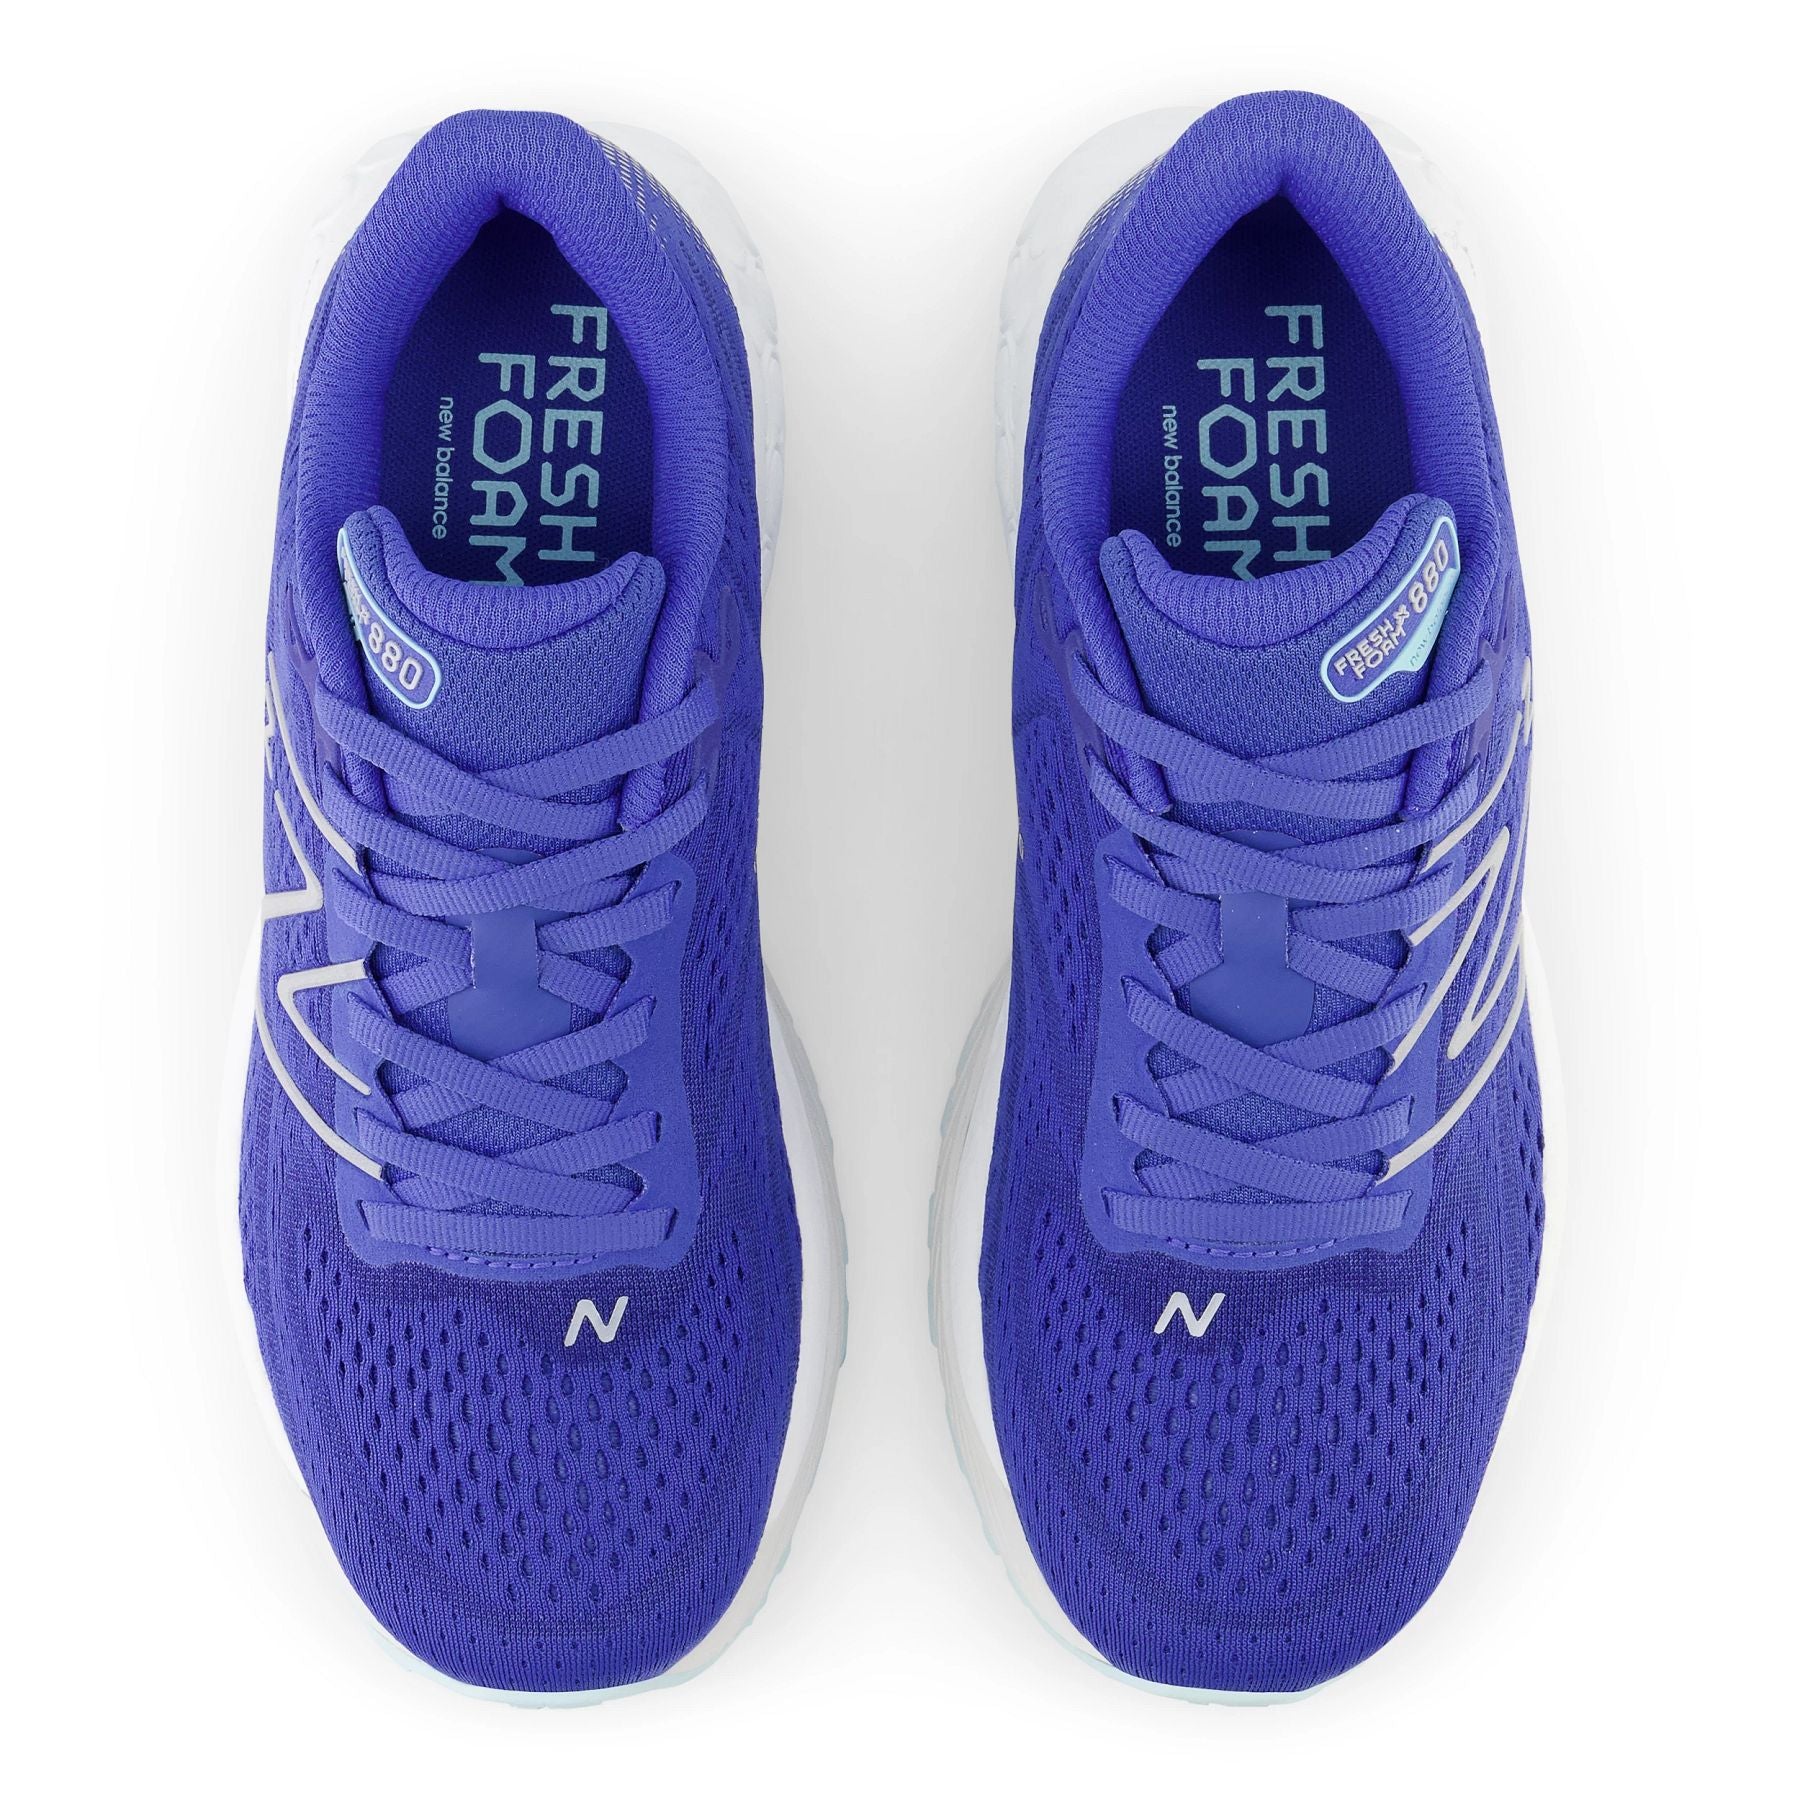 Top view of the Women's 880 V13 by New Balance in the color Marine Blue/Bright Cyan